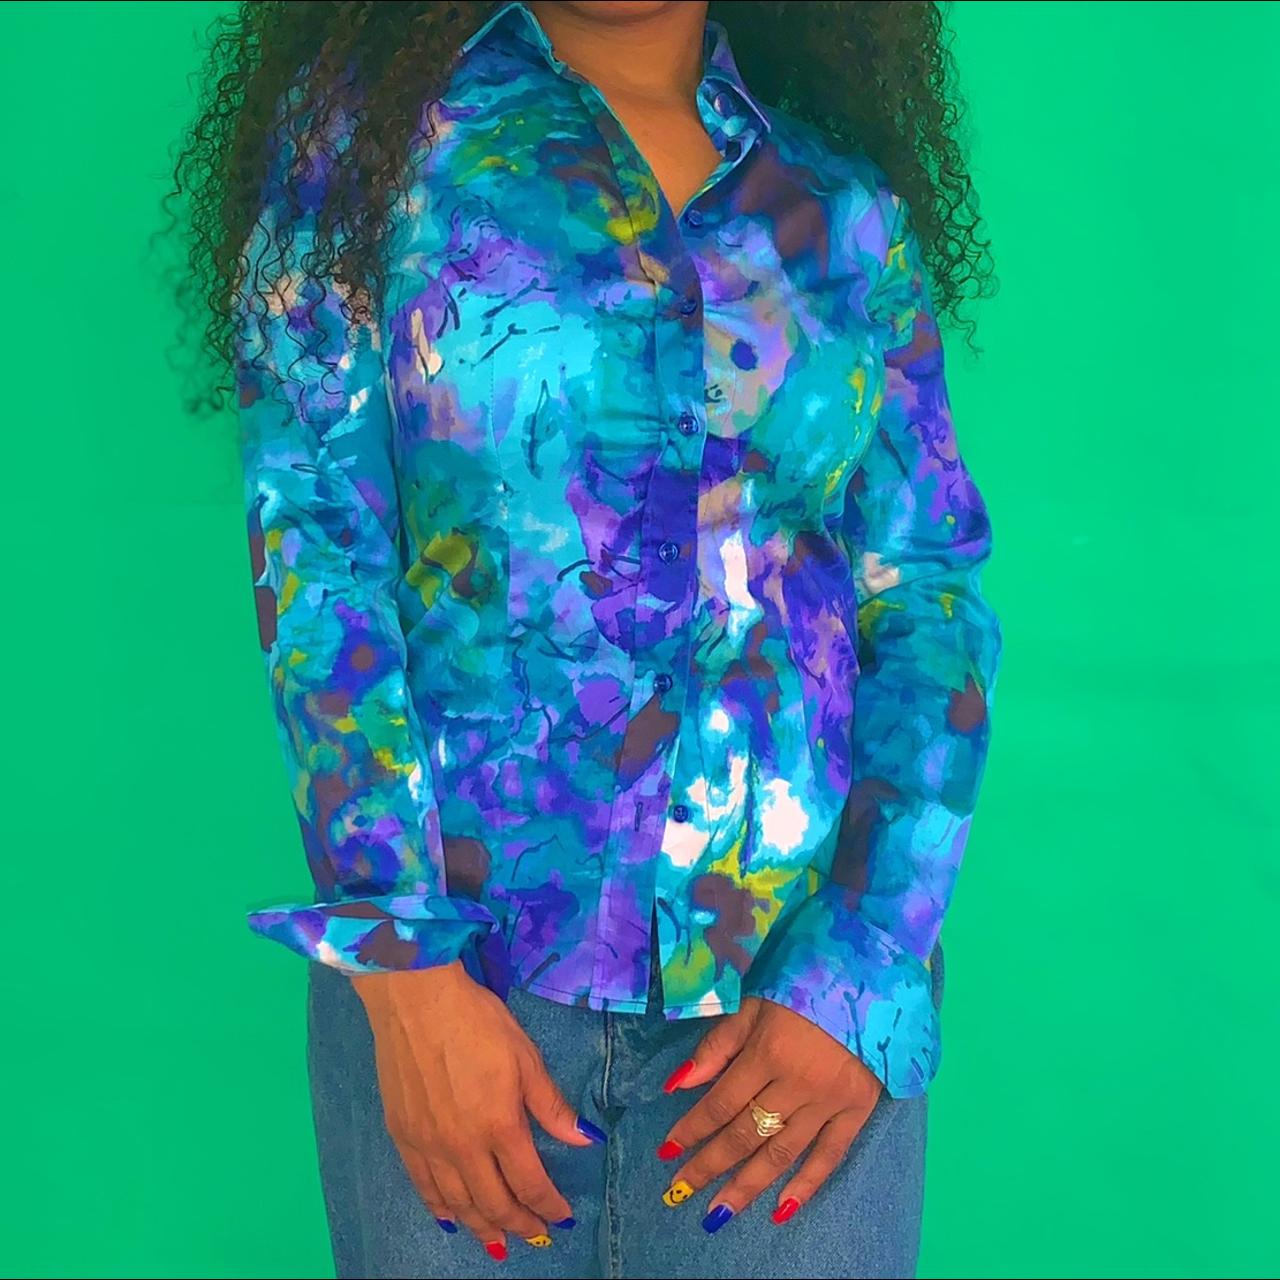 Product Image 3 - 💙💚💙💚 VINTAGE ABSTRACT BLOUSE 🟢💙💚💙

Lovely